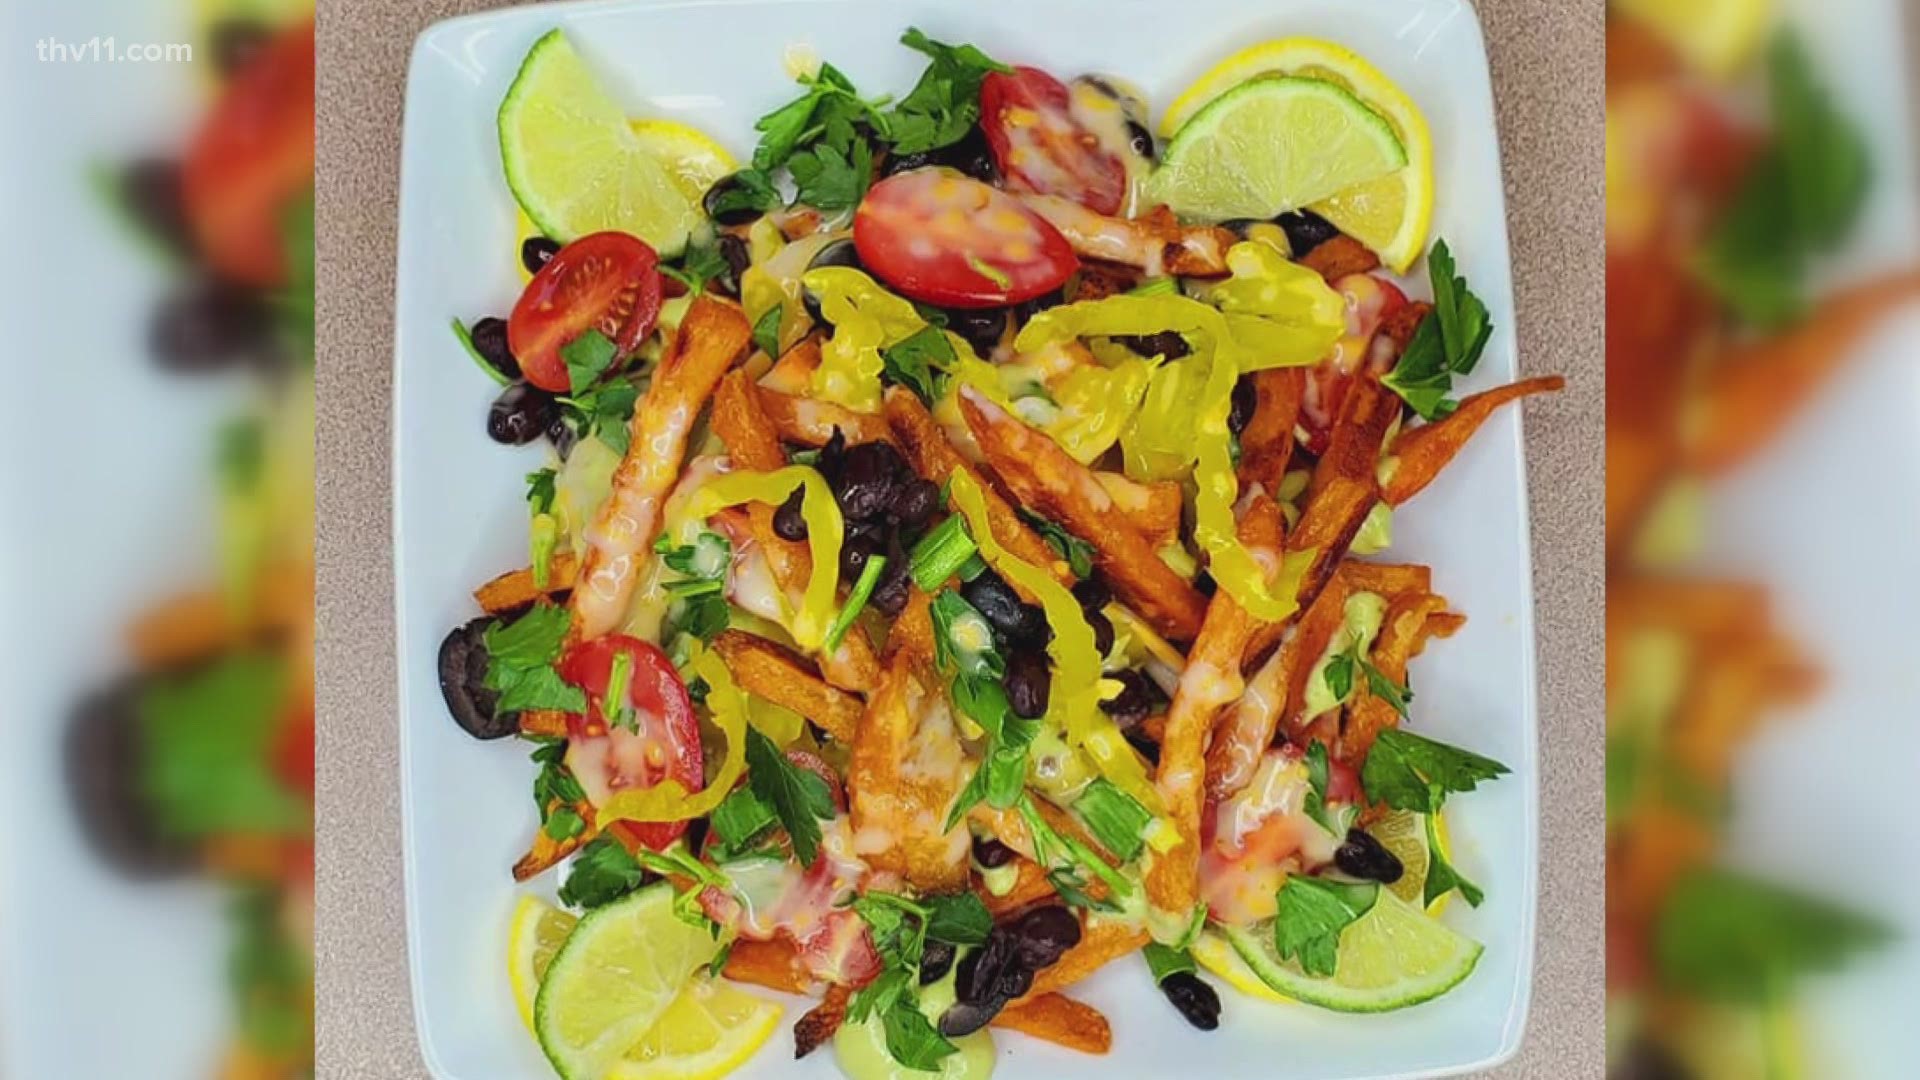 Dr. Tionna Jenkins with Plate it Healthy shares a vegan loaded sweet potato fries recipe.